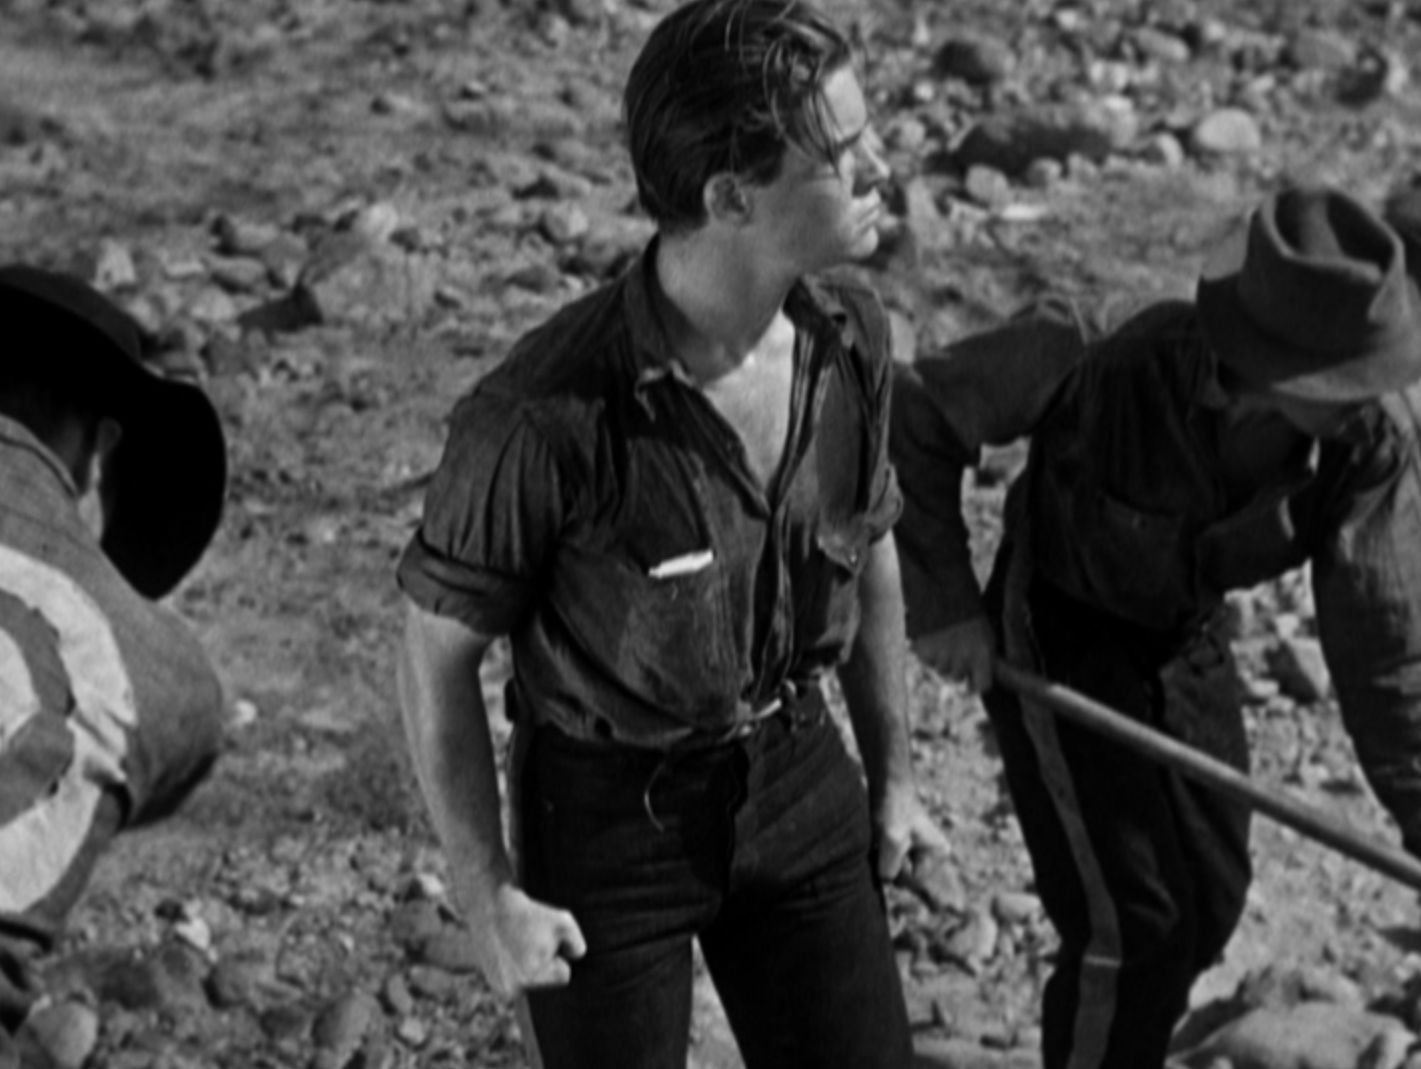 Hell's Highway (1932) Review, with Richard Dix and Tom Brown –